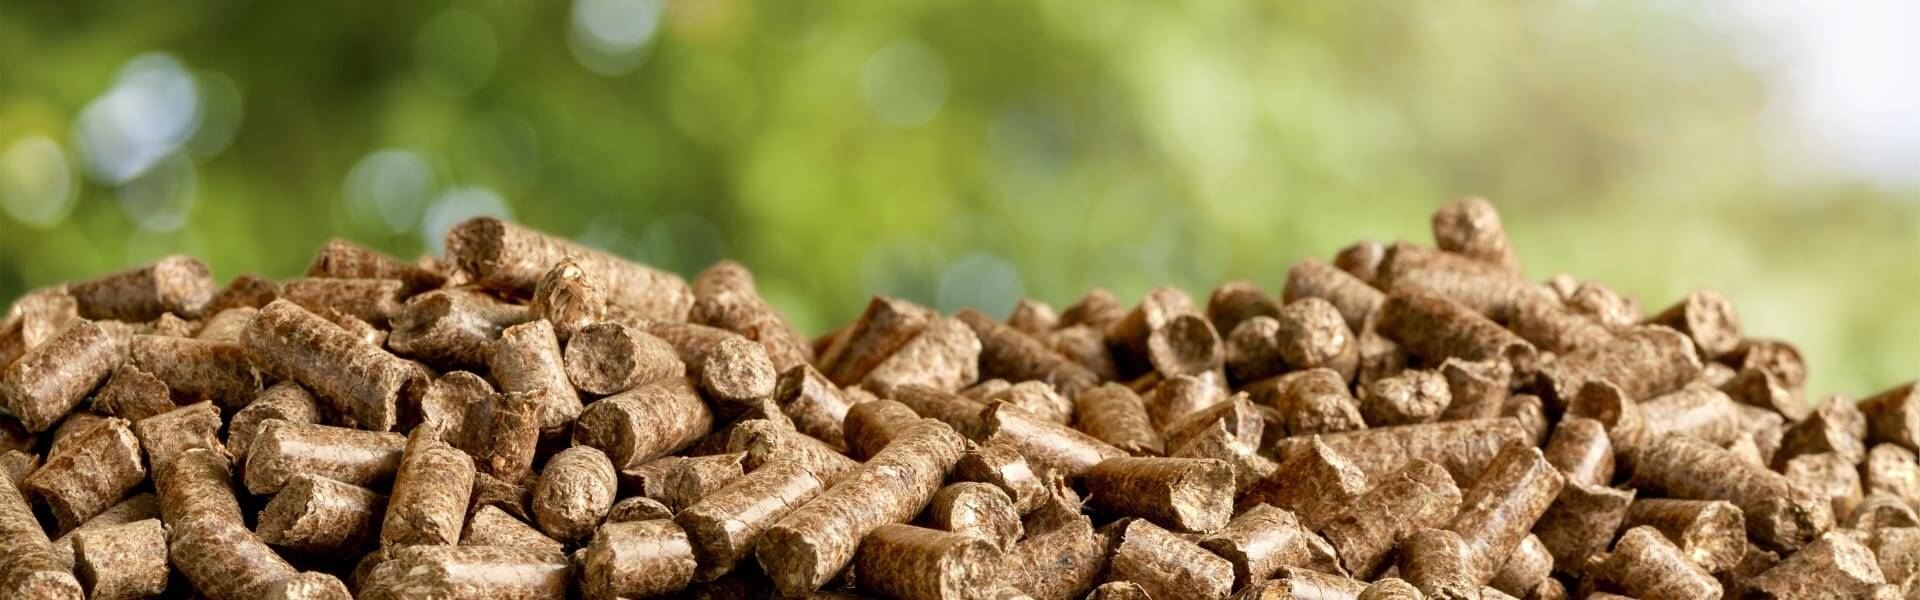 Government approves £26m biomass funding